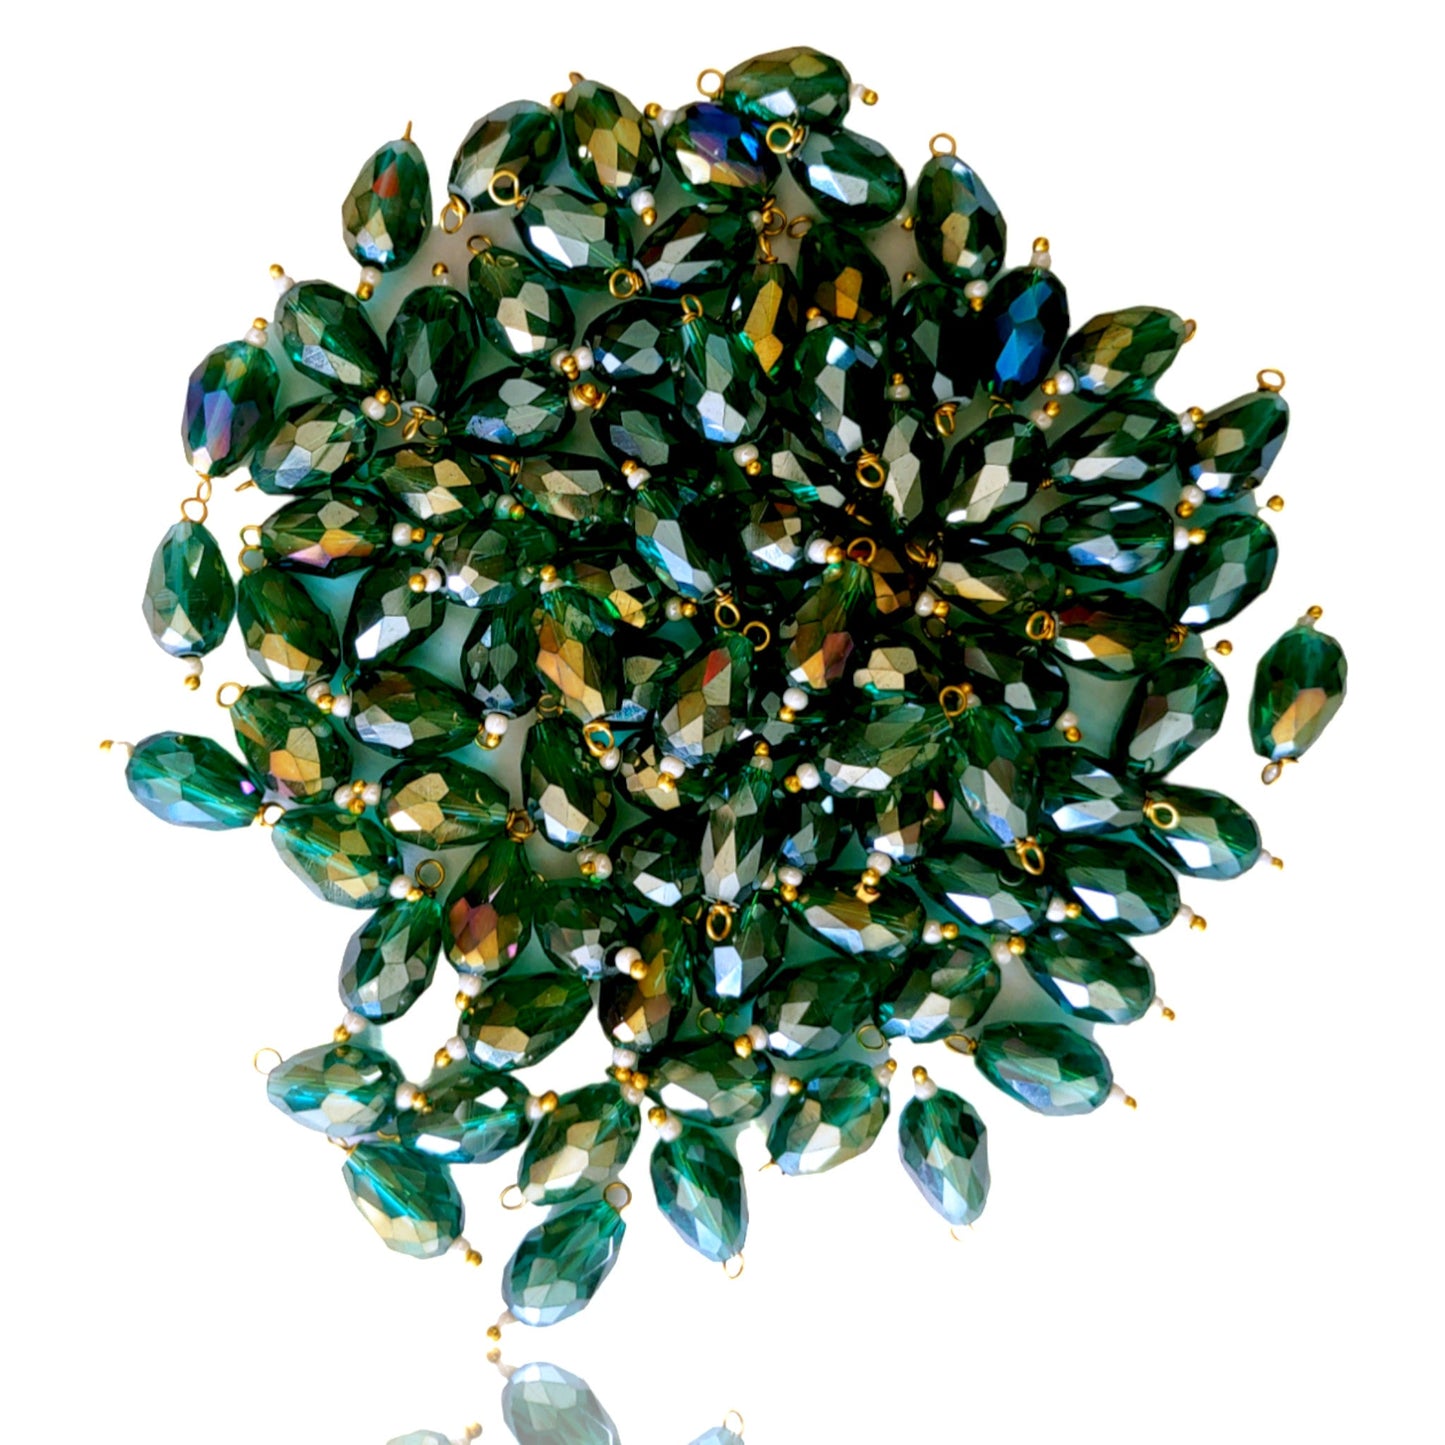 Indian Petals Colored Glass Drop Shaped Beads Ideal for Jewelry designing, Arts , Craft Making  or Decor